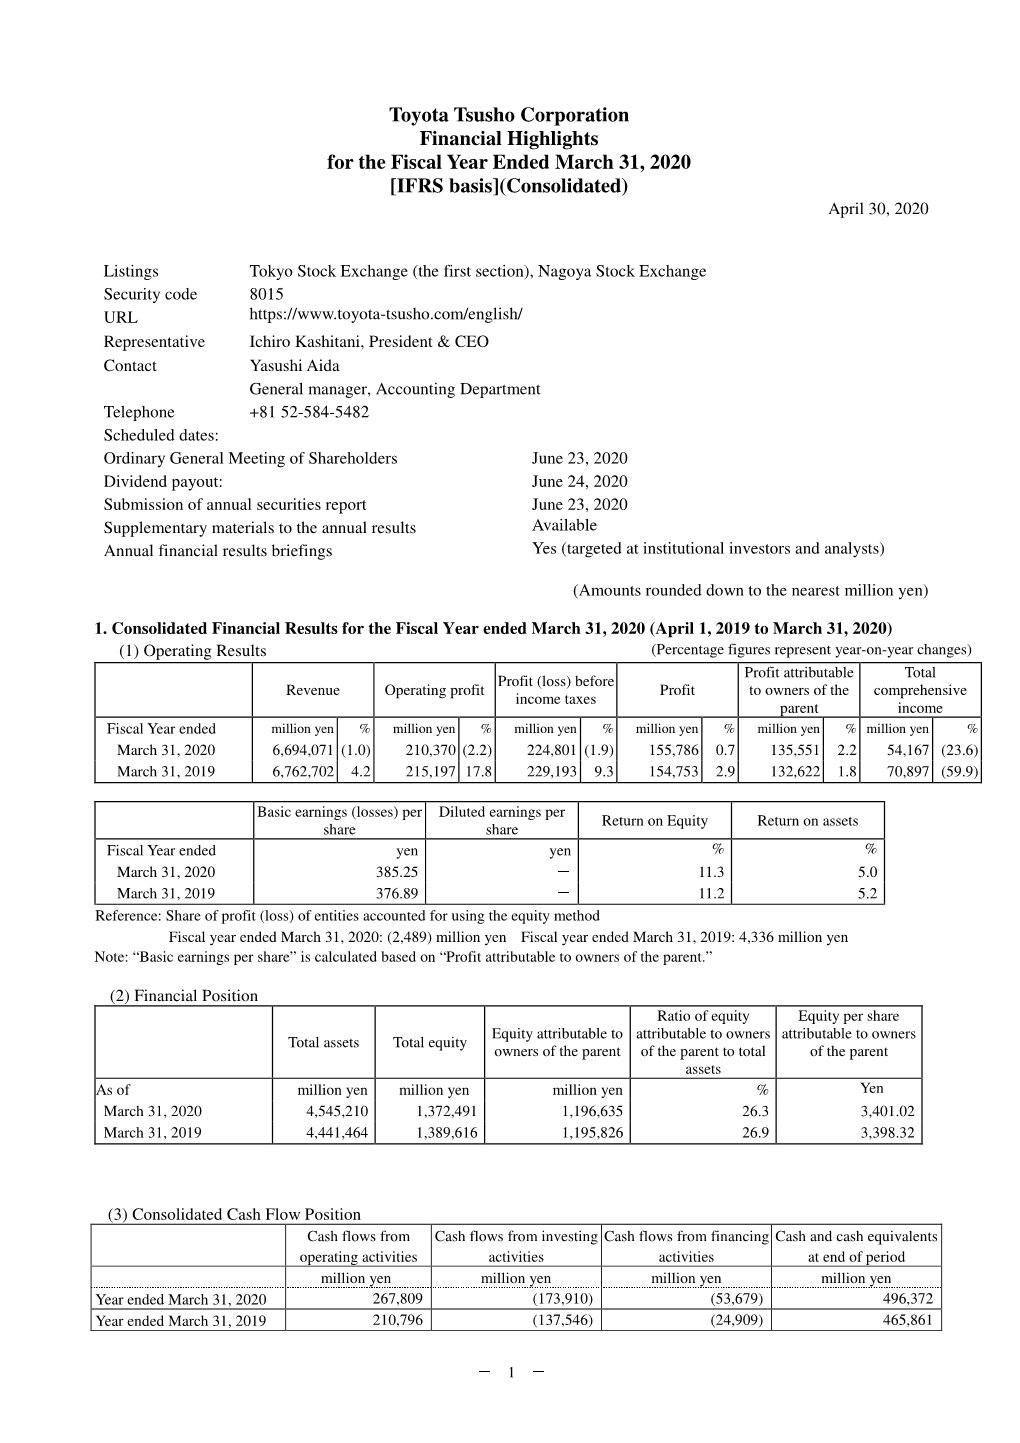 Toyota Tsusho Corporation Financial Highlights for the Fiscal Year Ended March 31, 2020 [IFRS Basis](Consolidated) April 30, 2020